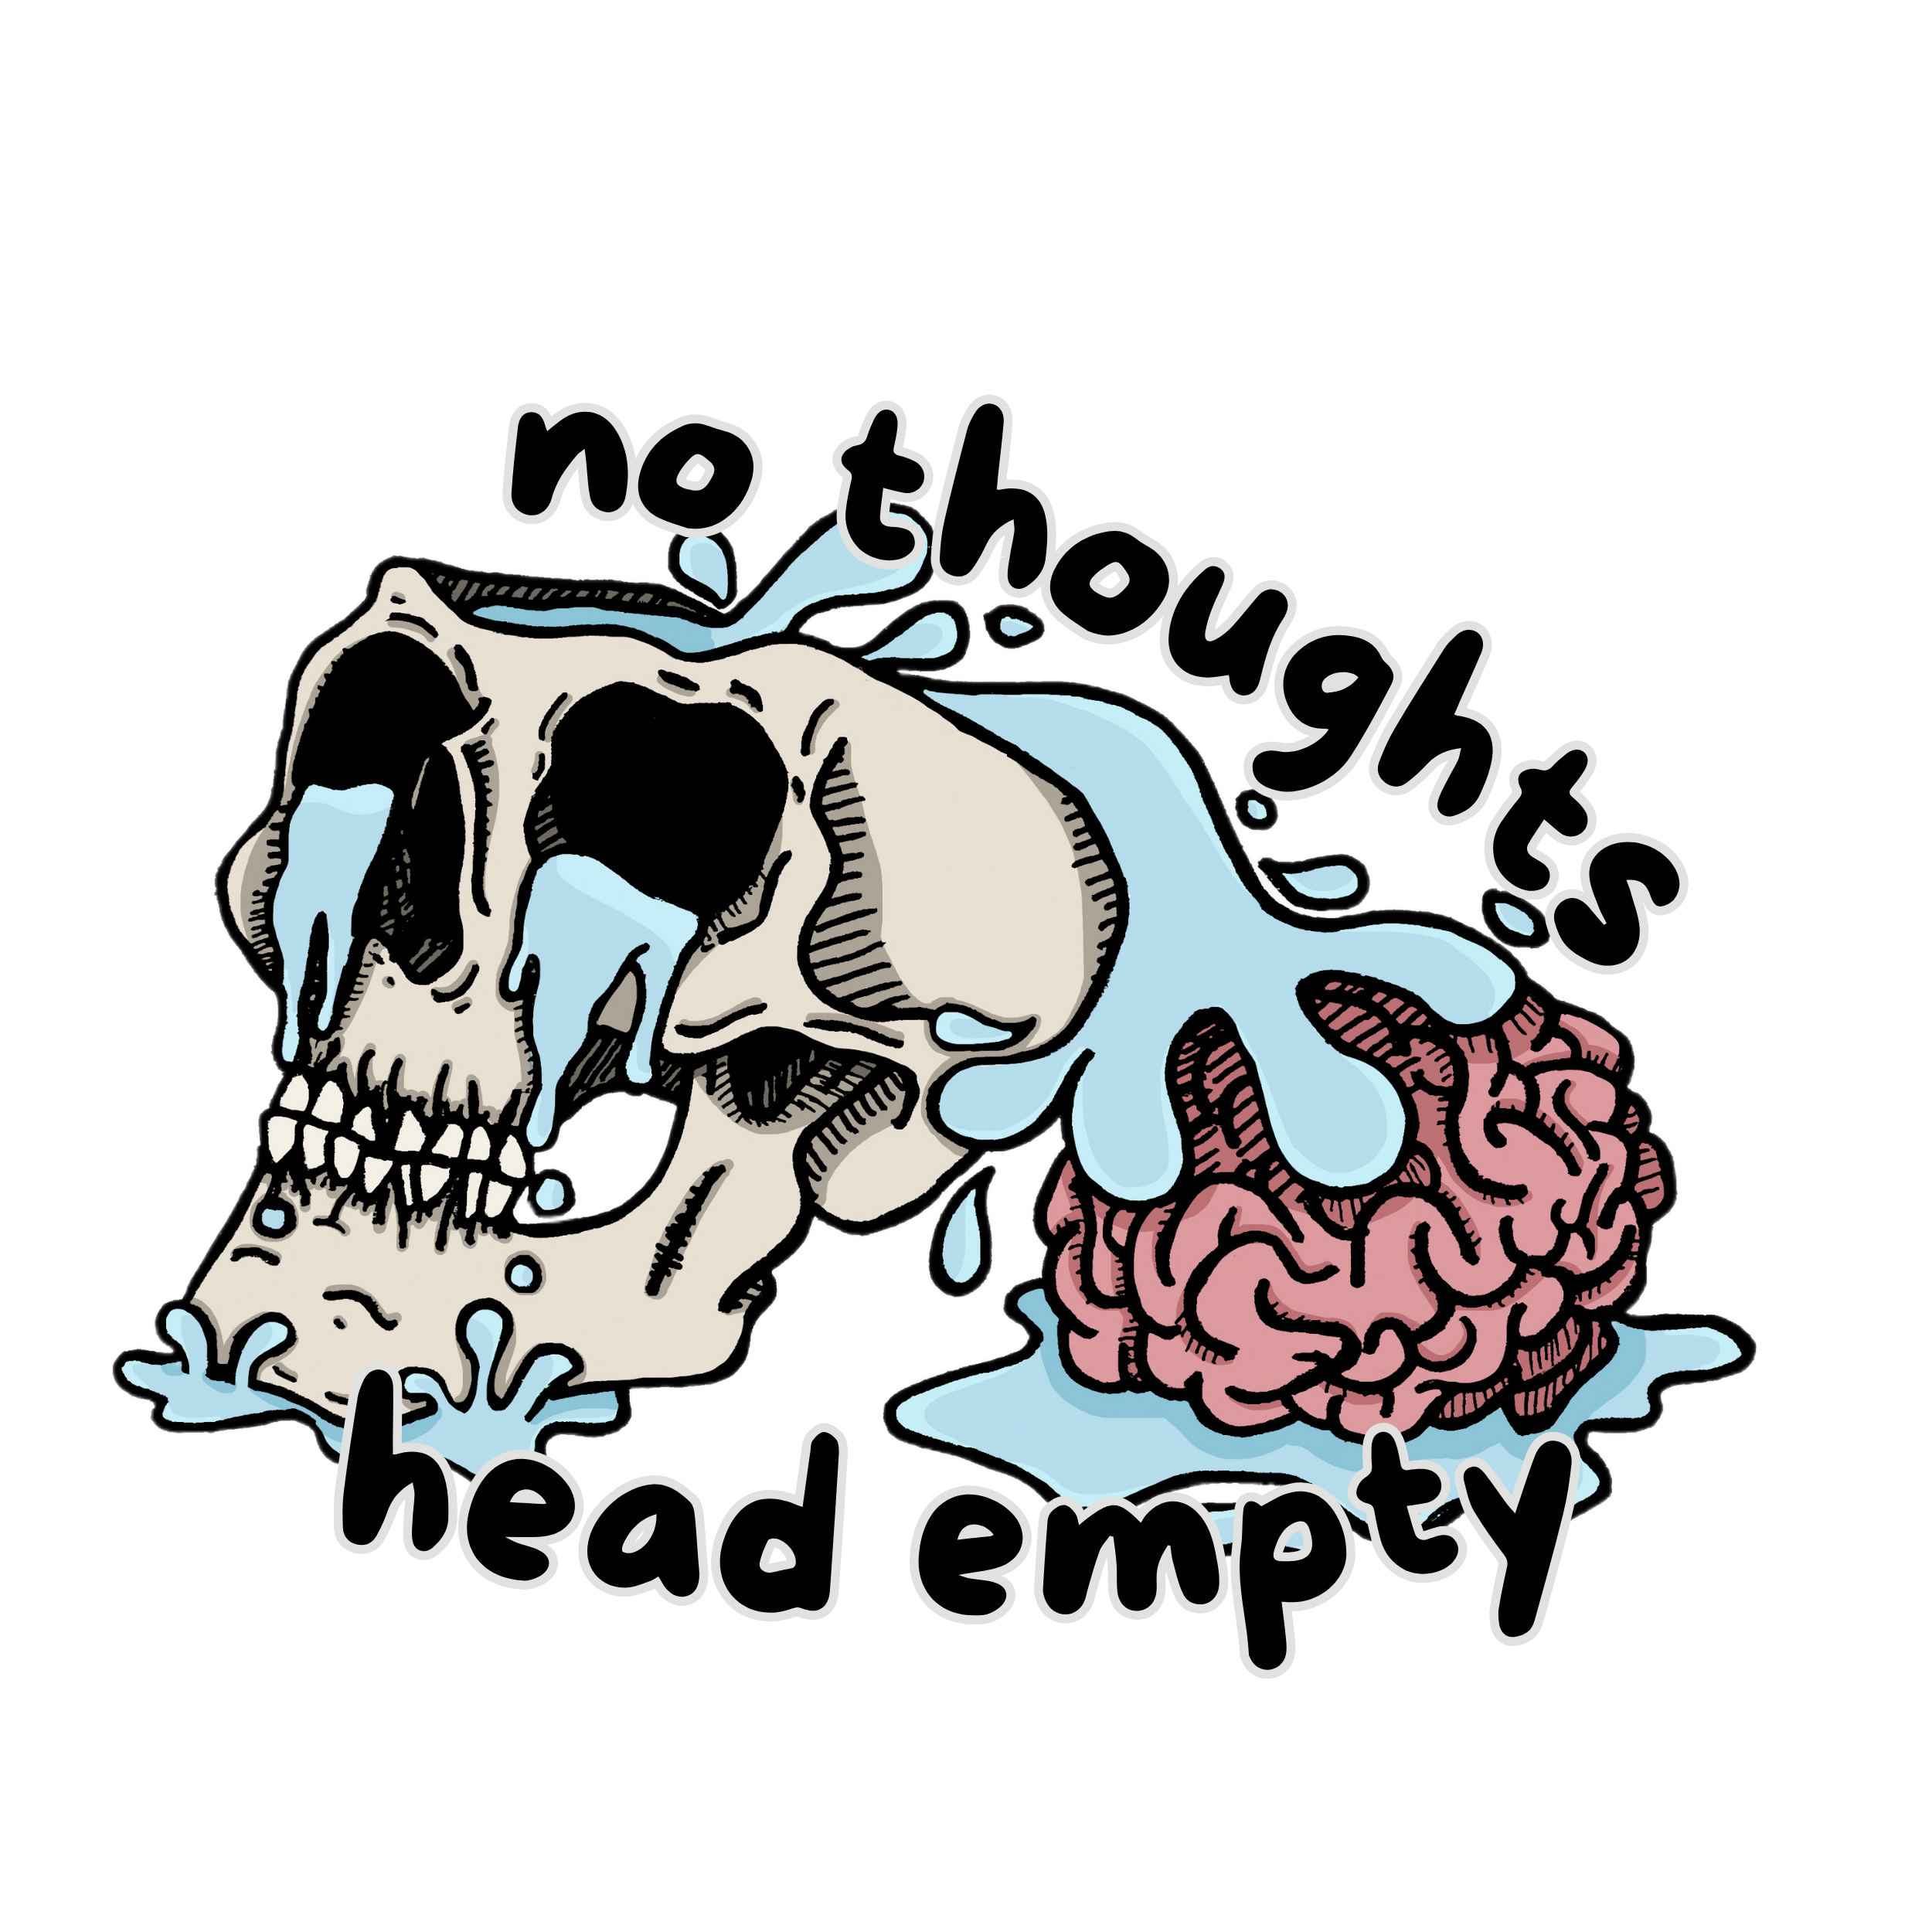 no thoughts head empty graphic t-shirt - gaslit apparel